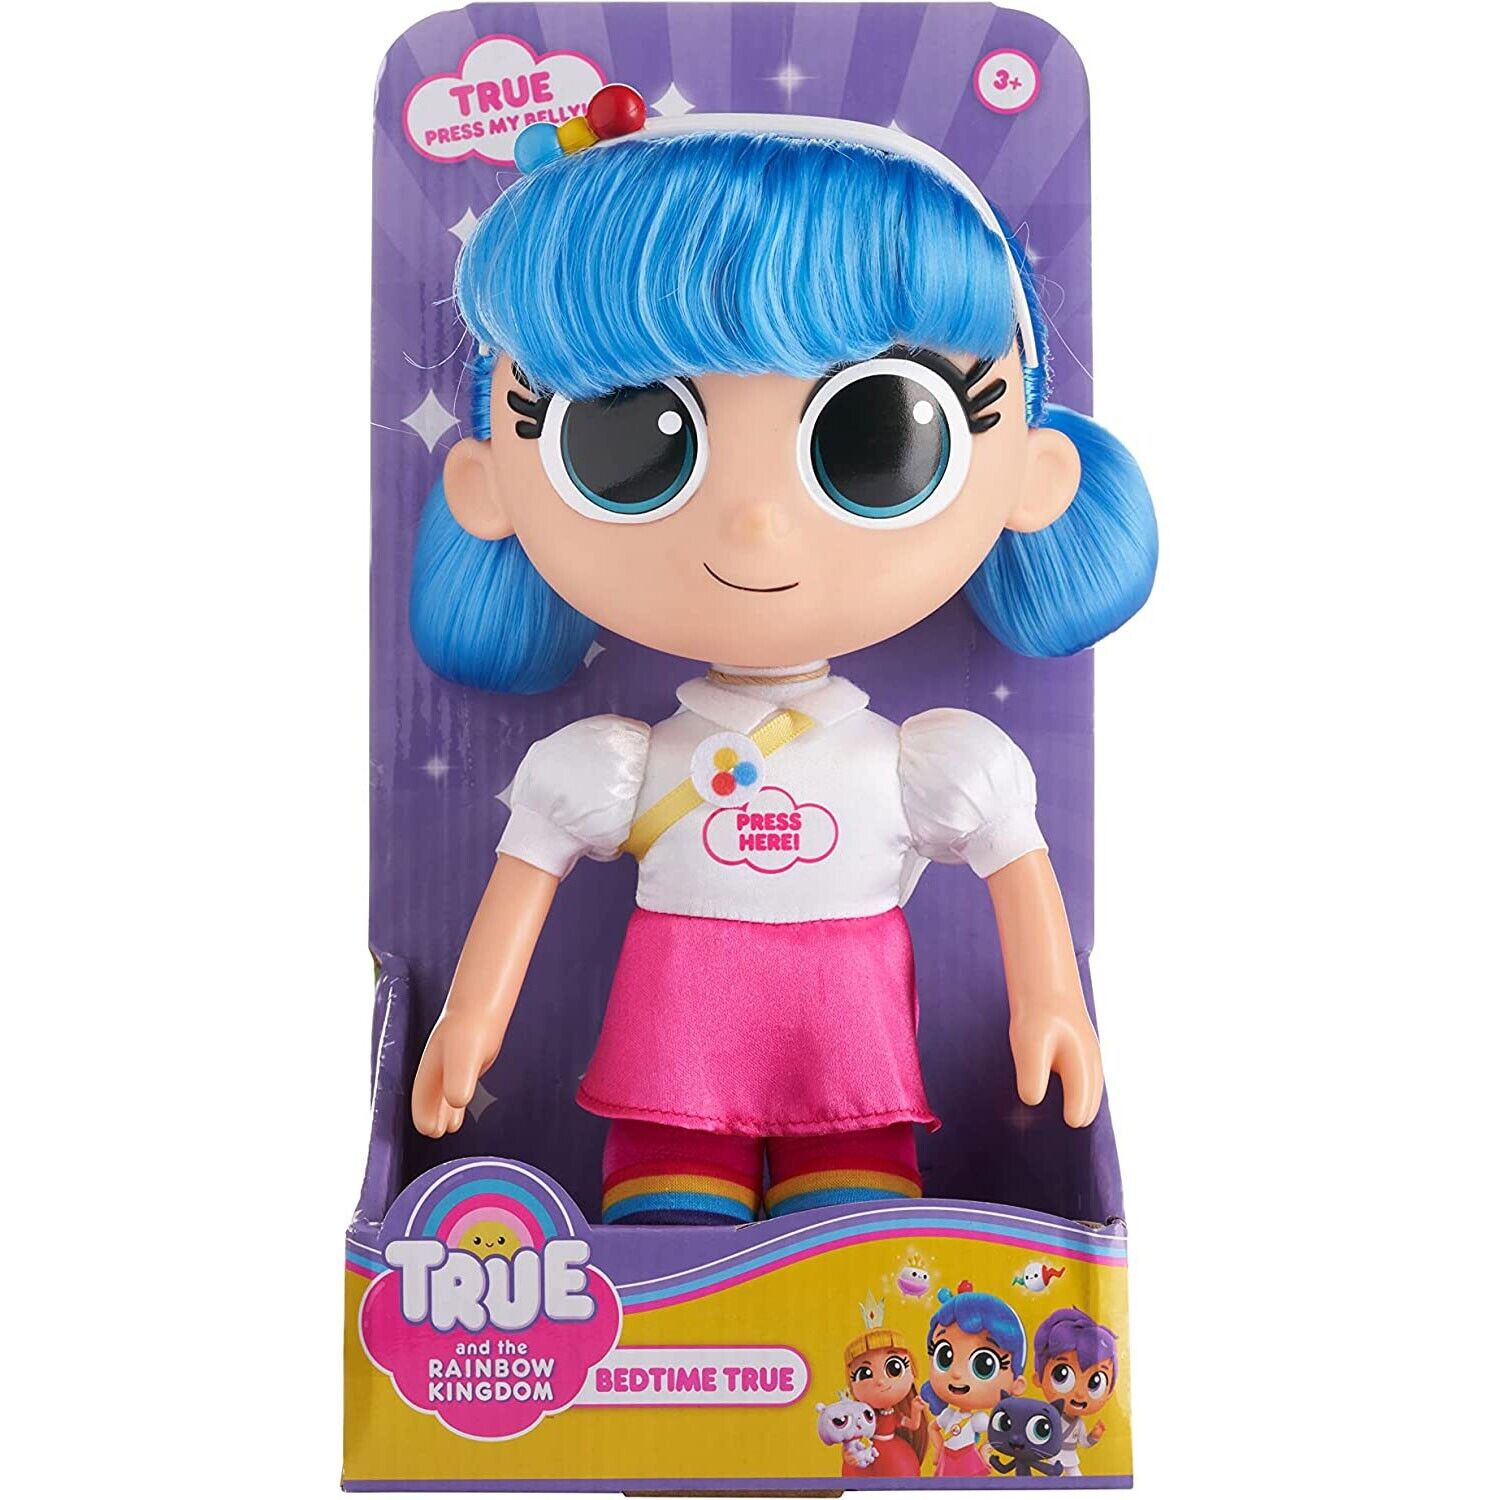 New True and the Rainbow Kingdom 25cm Light Up Bedtime Doll - Free Shipping